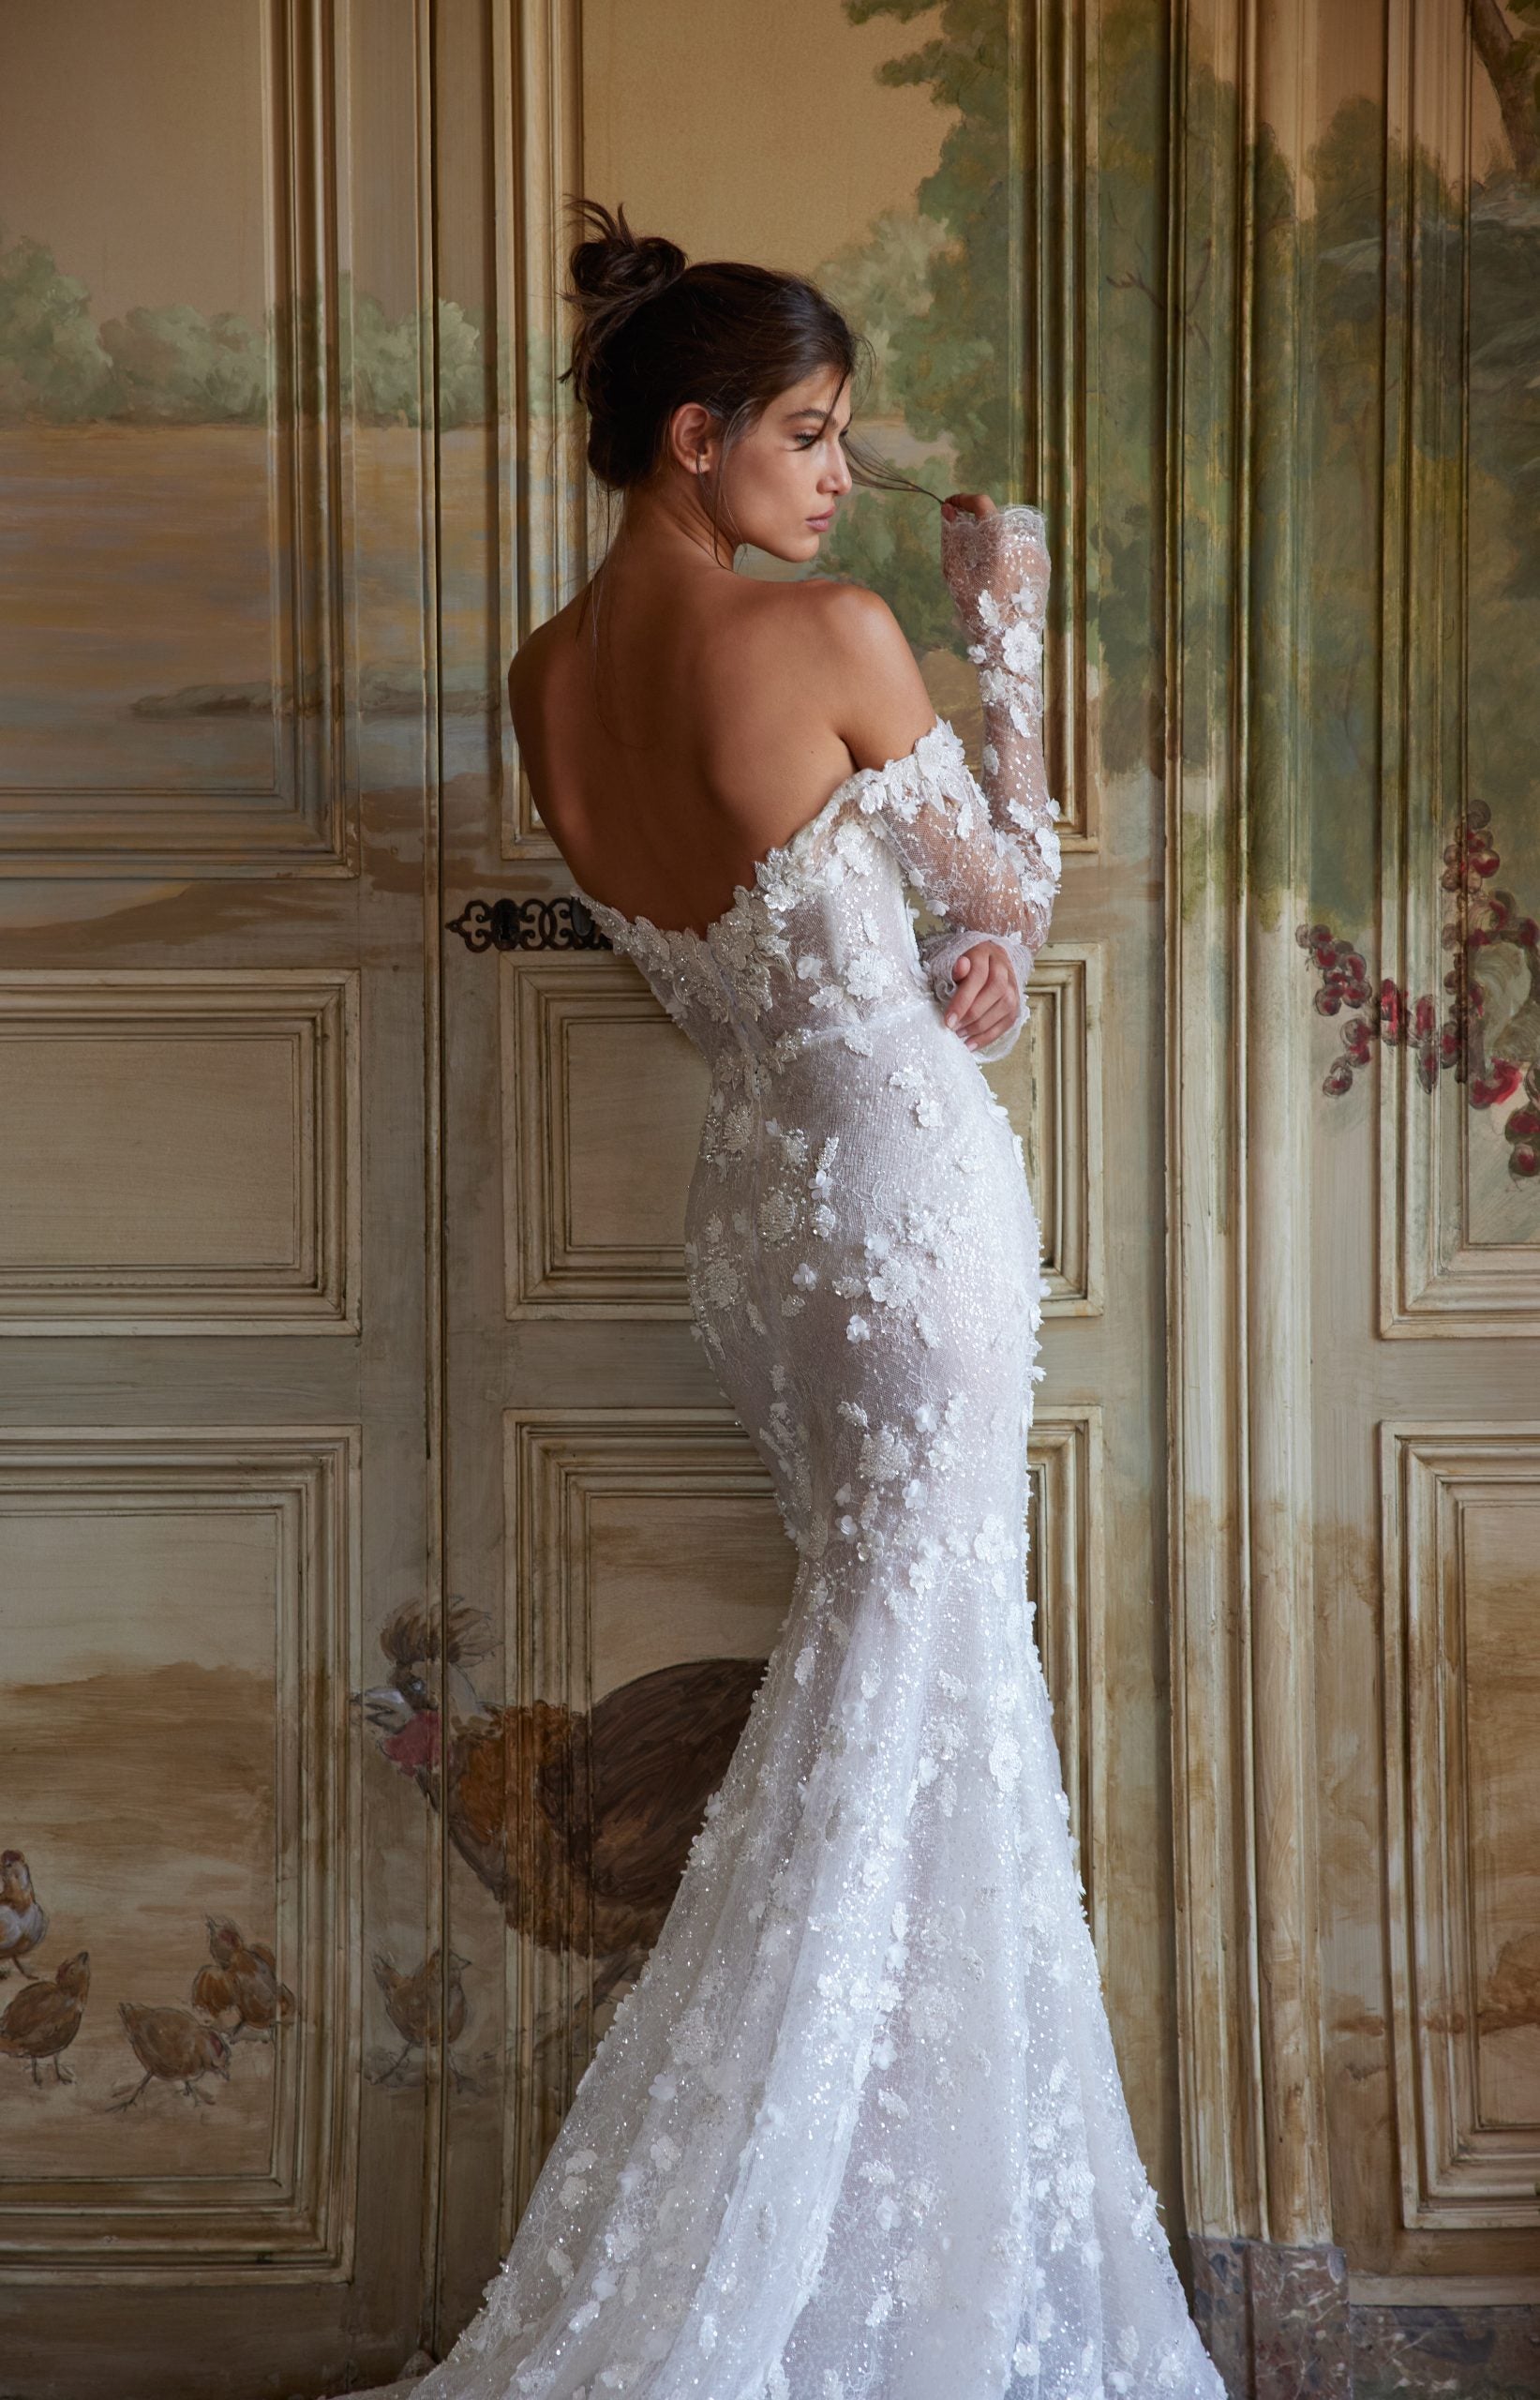 Ethereal And Elegant Floral Fit-and-Flare Gown by Netta BenShabu Elite Couture - Image 2